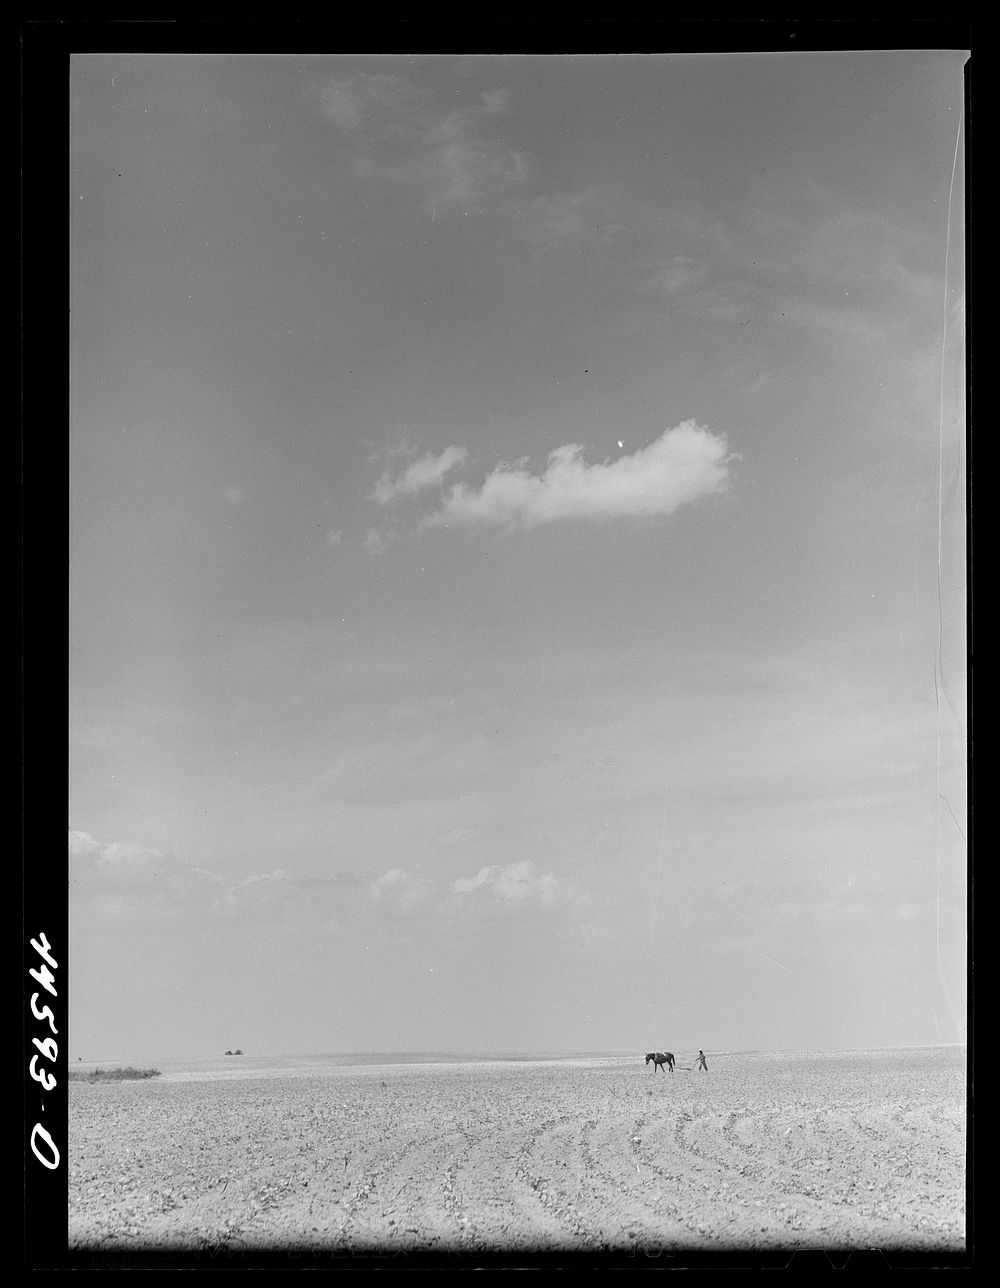 Plowing a field of cotton. Greene County, Georgia. Sourced from the Library of Congress.